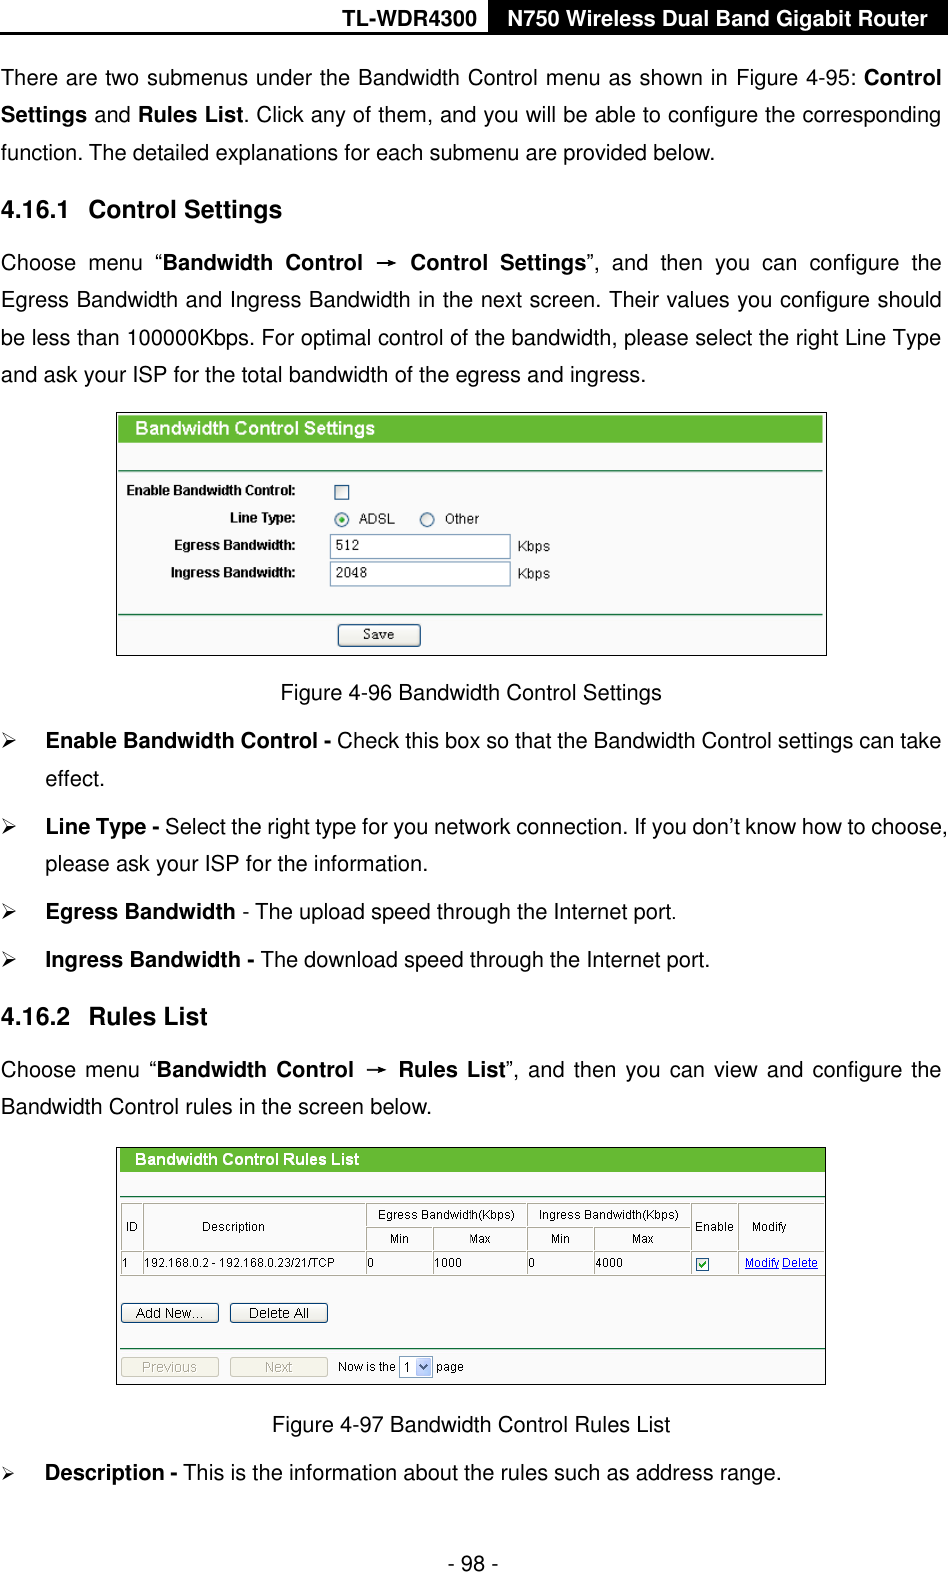 TL-WDR4300 N750 Wireless Dual Band Gigabit Router  - 98 - There are two submenus under the Bandwidth Control menu as shown in Figure 4-95: Control Settings and Rules List. Click any of them, and you will be able to configure the corresponding function. The detailed explanations for each submenu are provided below. 4.16.1  Control Settings Choose  menu  “Bandwidth  Control  →  Control  Settings”,  and  then  you  can  configure  the Egress Bandwidth and Ingress Bandwidth in the next screen. Their values you configure should be less than 100000Kbps. For optimal control of the bandwidth, please select the right Line Type and ask your ISP for the total bandwidth of the egress and ingress.  Figure 4-96 Bandwidth Control Settings  Enable Bandwidth Control - Check this box so that the Bandwidth Control settings can take effect.  Line Type - Select the right type for you network connection. If you don’t know how to choose, please ask your ISP for the information.  Egress Bandwidth - The upload speed through the Internet port.  Ingress Bandwidth - The download speed through the Internet port. 4.16.2  Rules List Choose menu “Bandwidth Control  →  Rules List”, and then you can view and configure the Bandwidth Control rules in the screen below.  Figure 4-97 Bandwidth Control Rules List  Description - This is the information about the rules such as address range. 